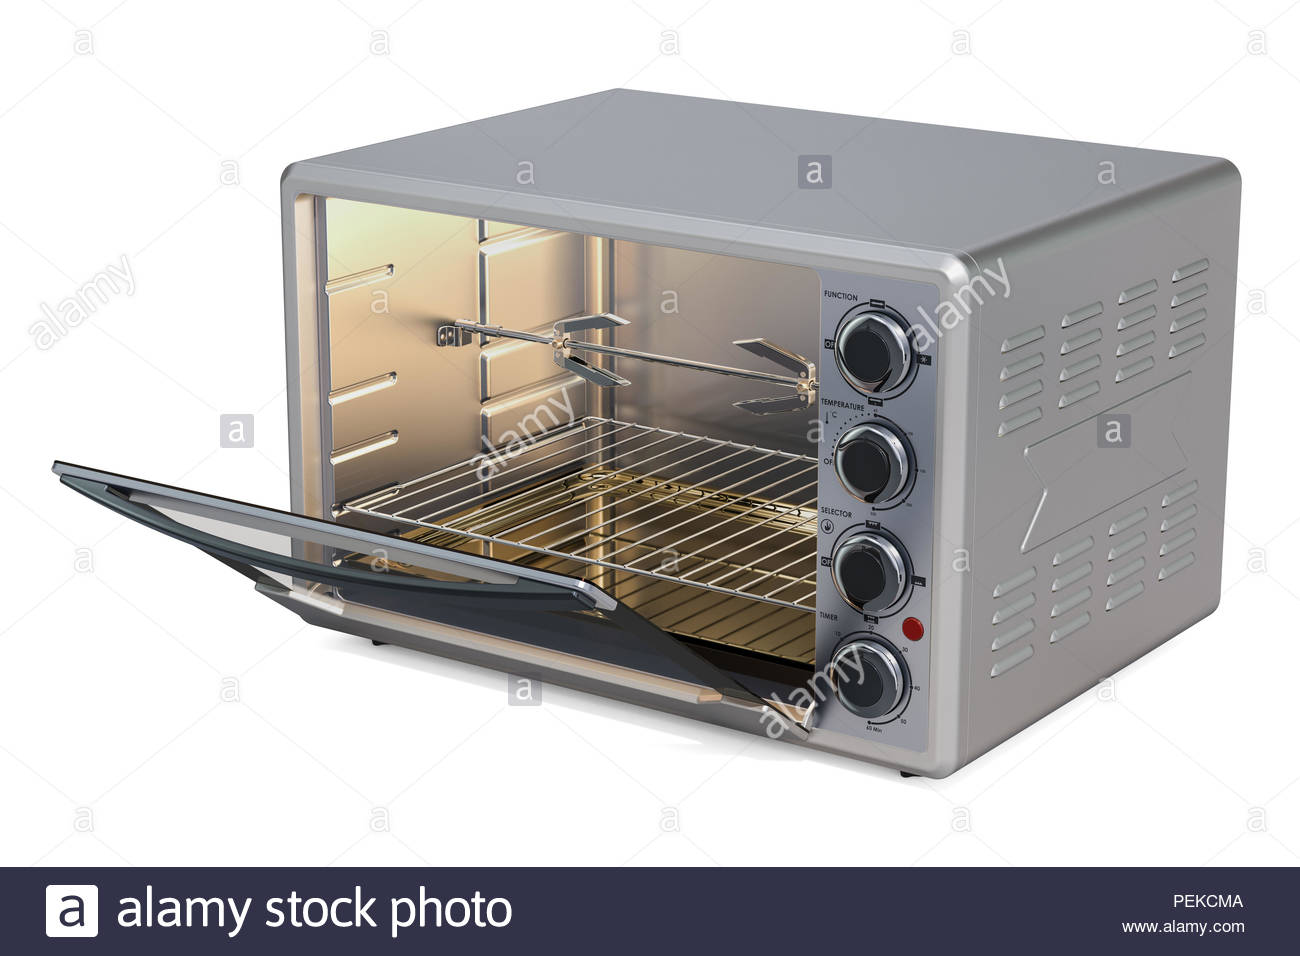 Opened Convection Toaster Oven With Rotisserie And Grill 3d